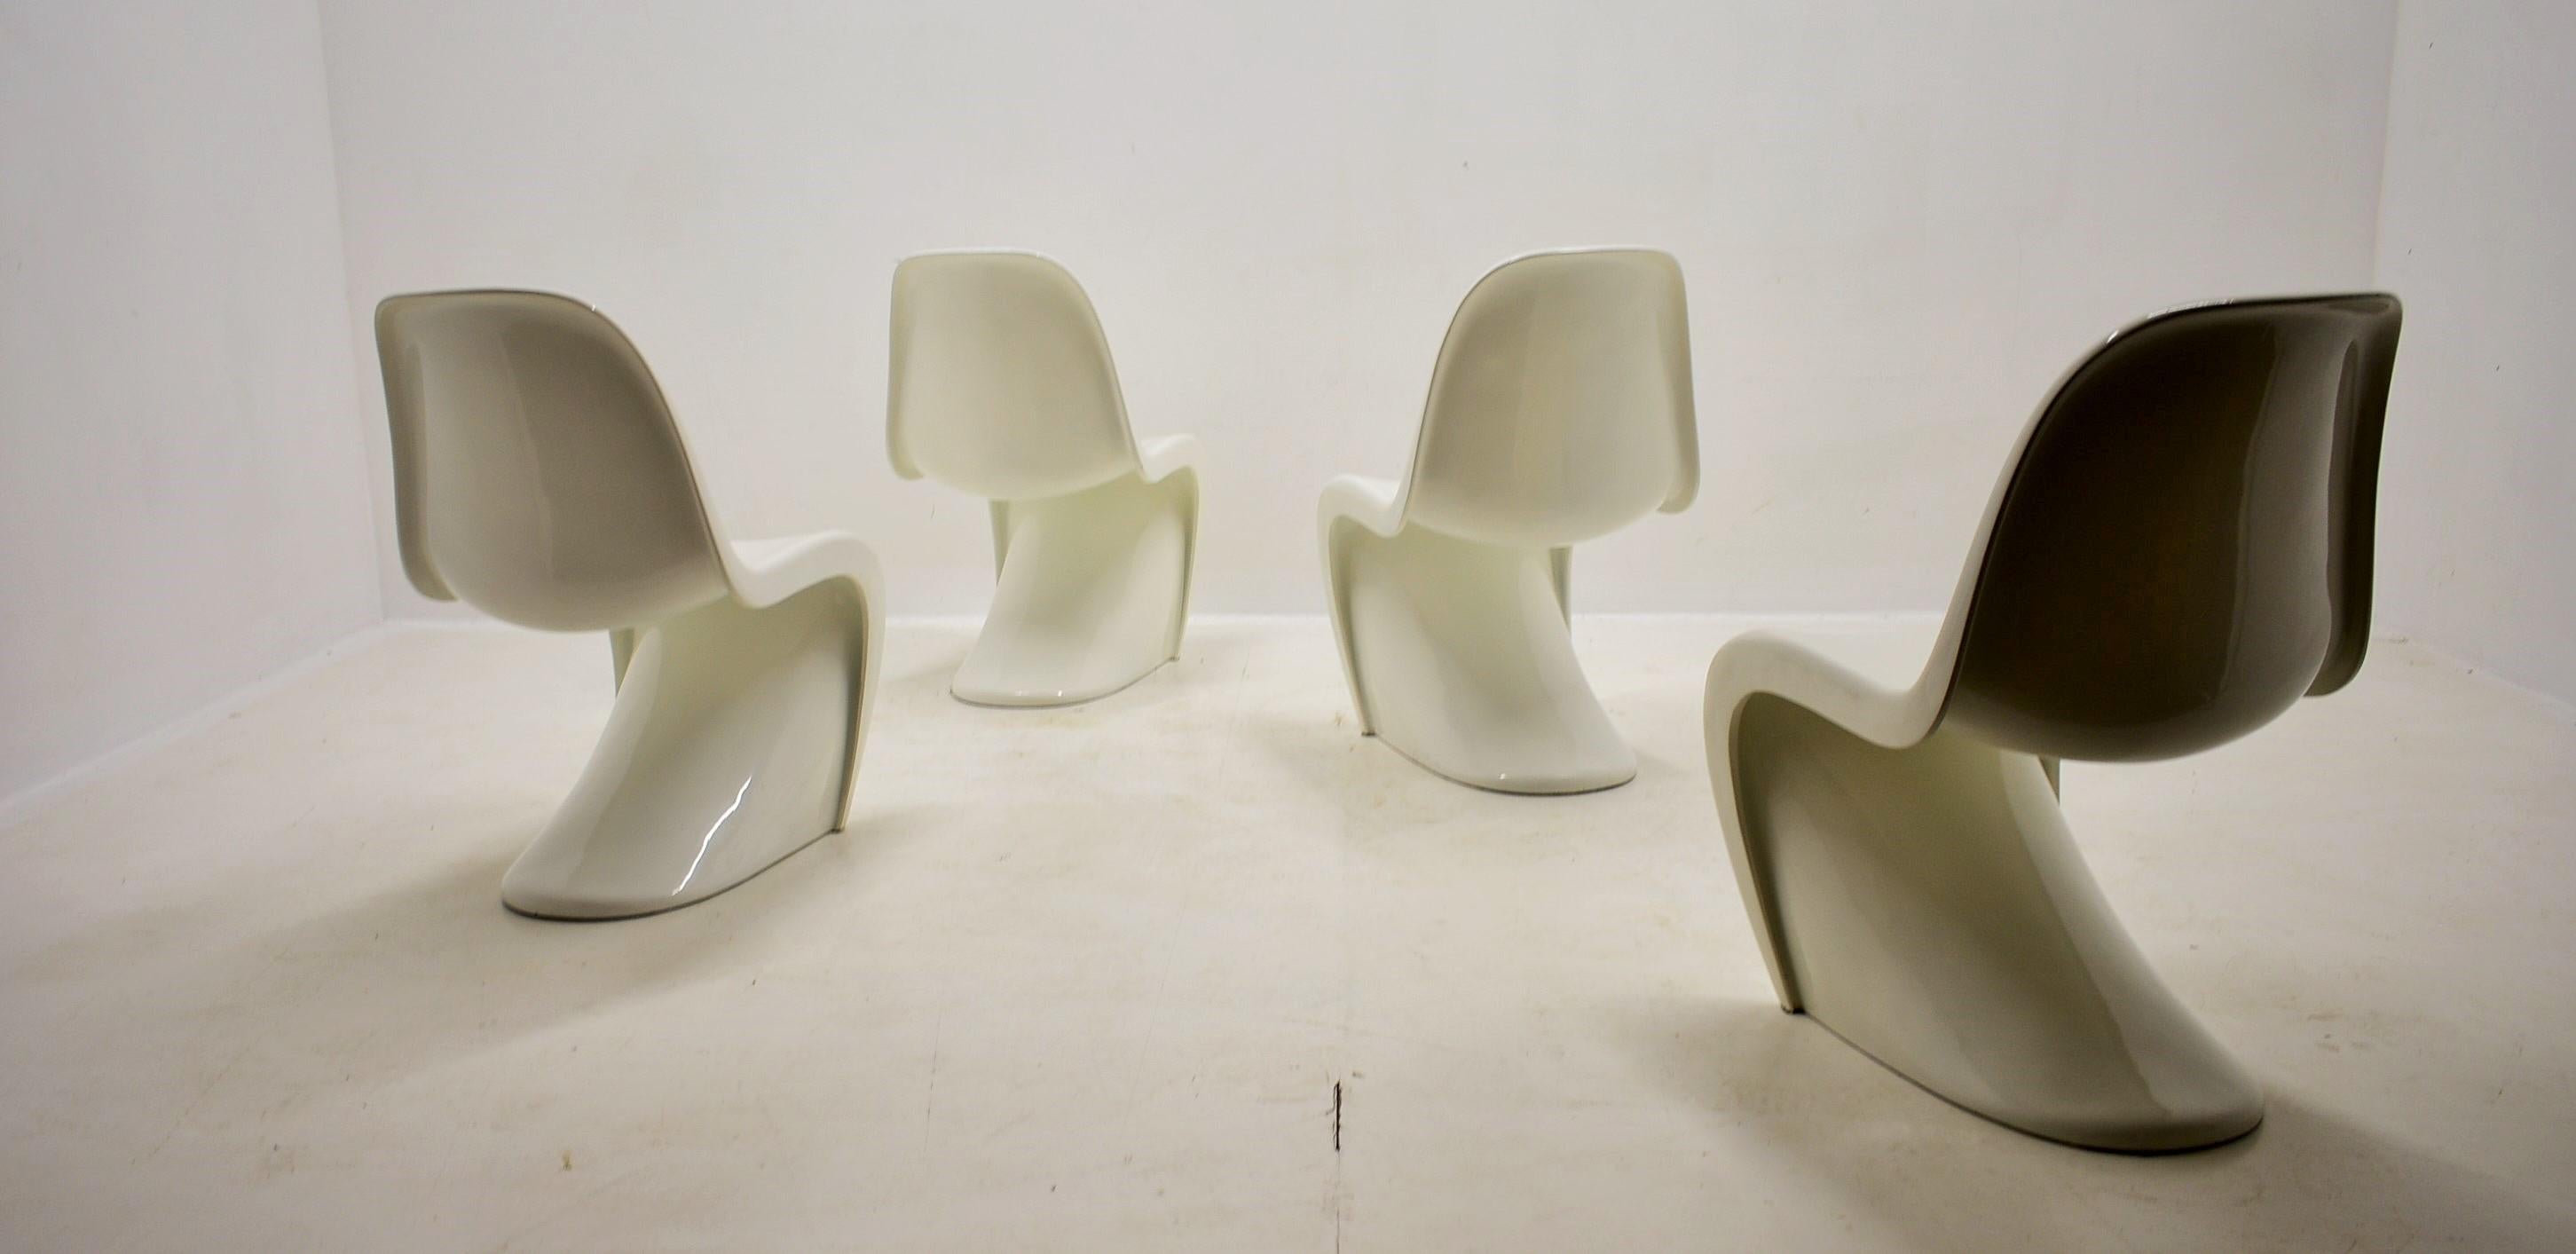 Panton S, Chairs Vitra by Verner Panton for Herman Miller 1965s For Sale 1